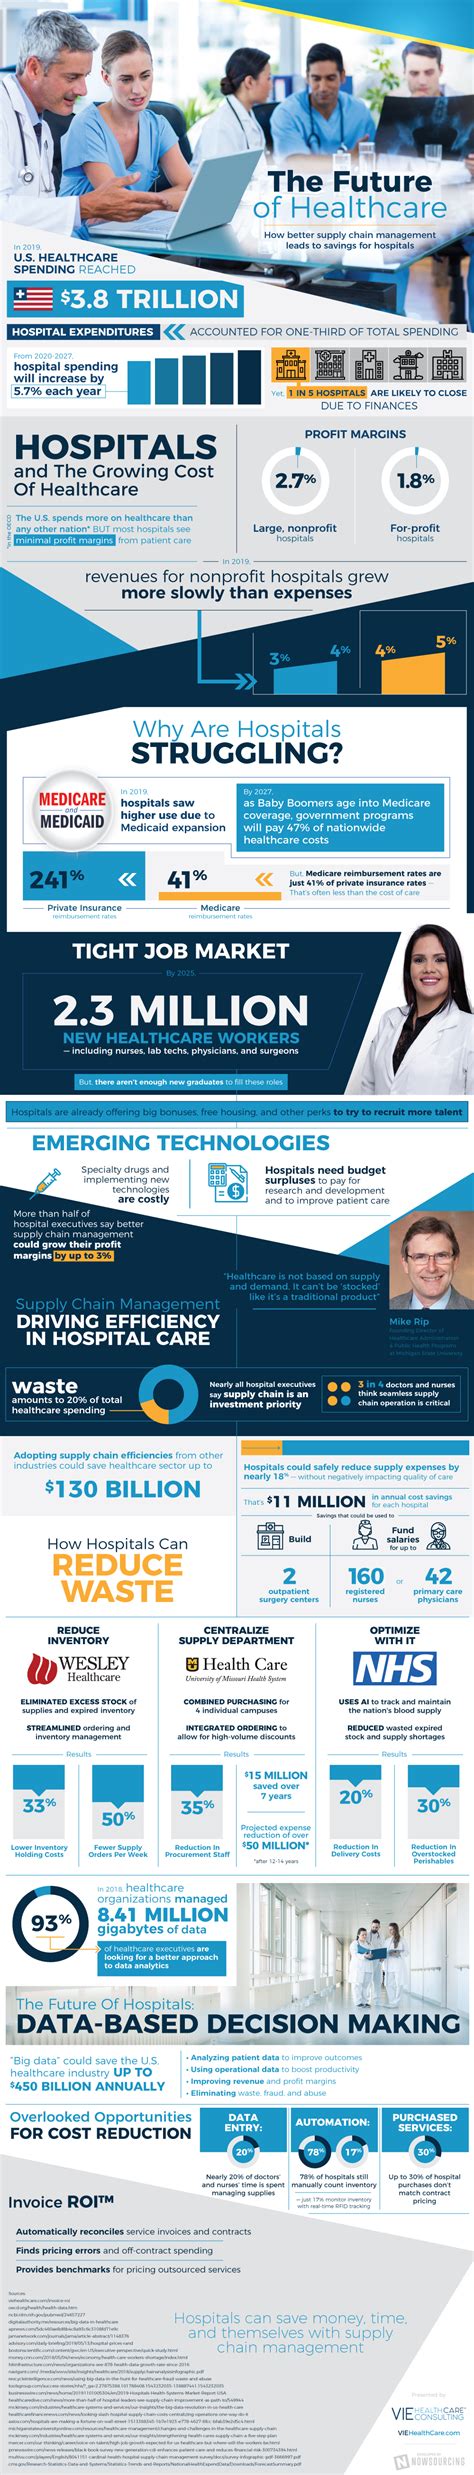 Hospital Supply Chain Management Solutions Infographic Visualistan